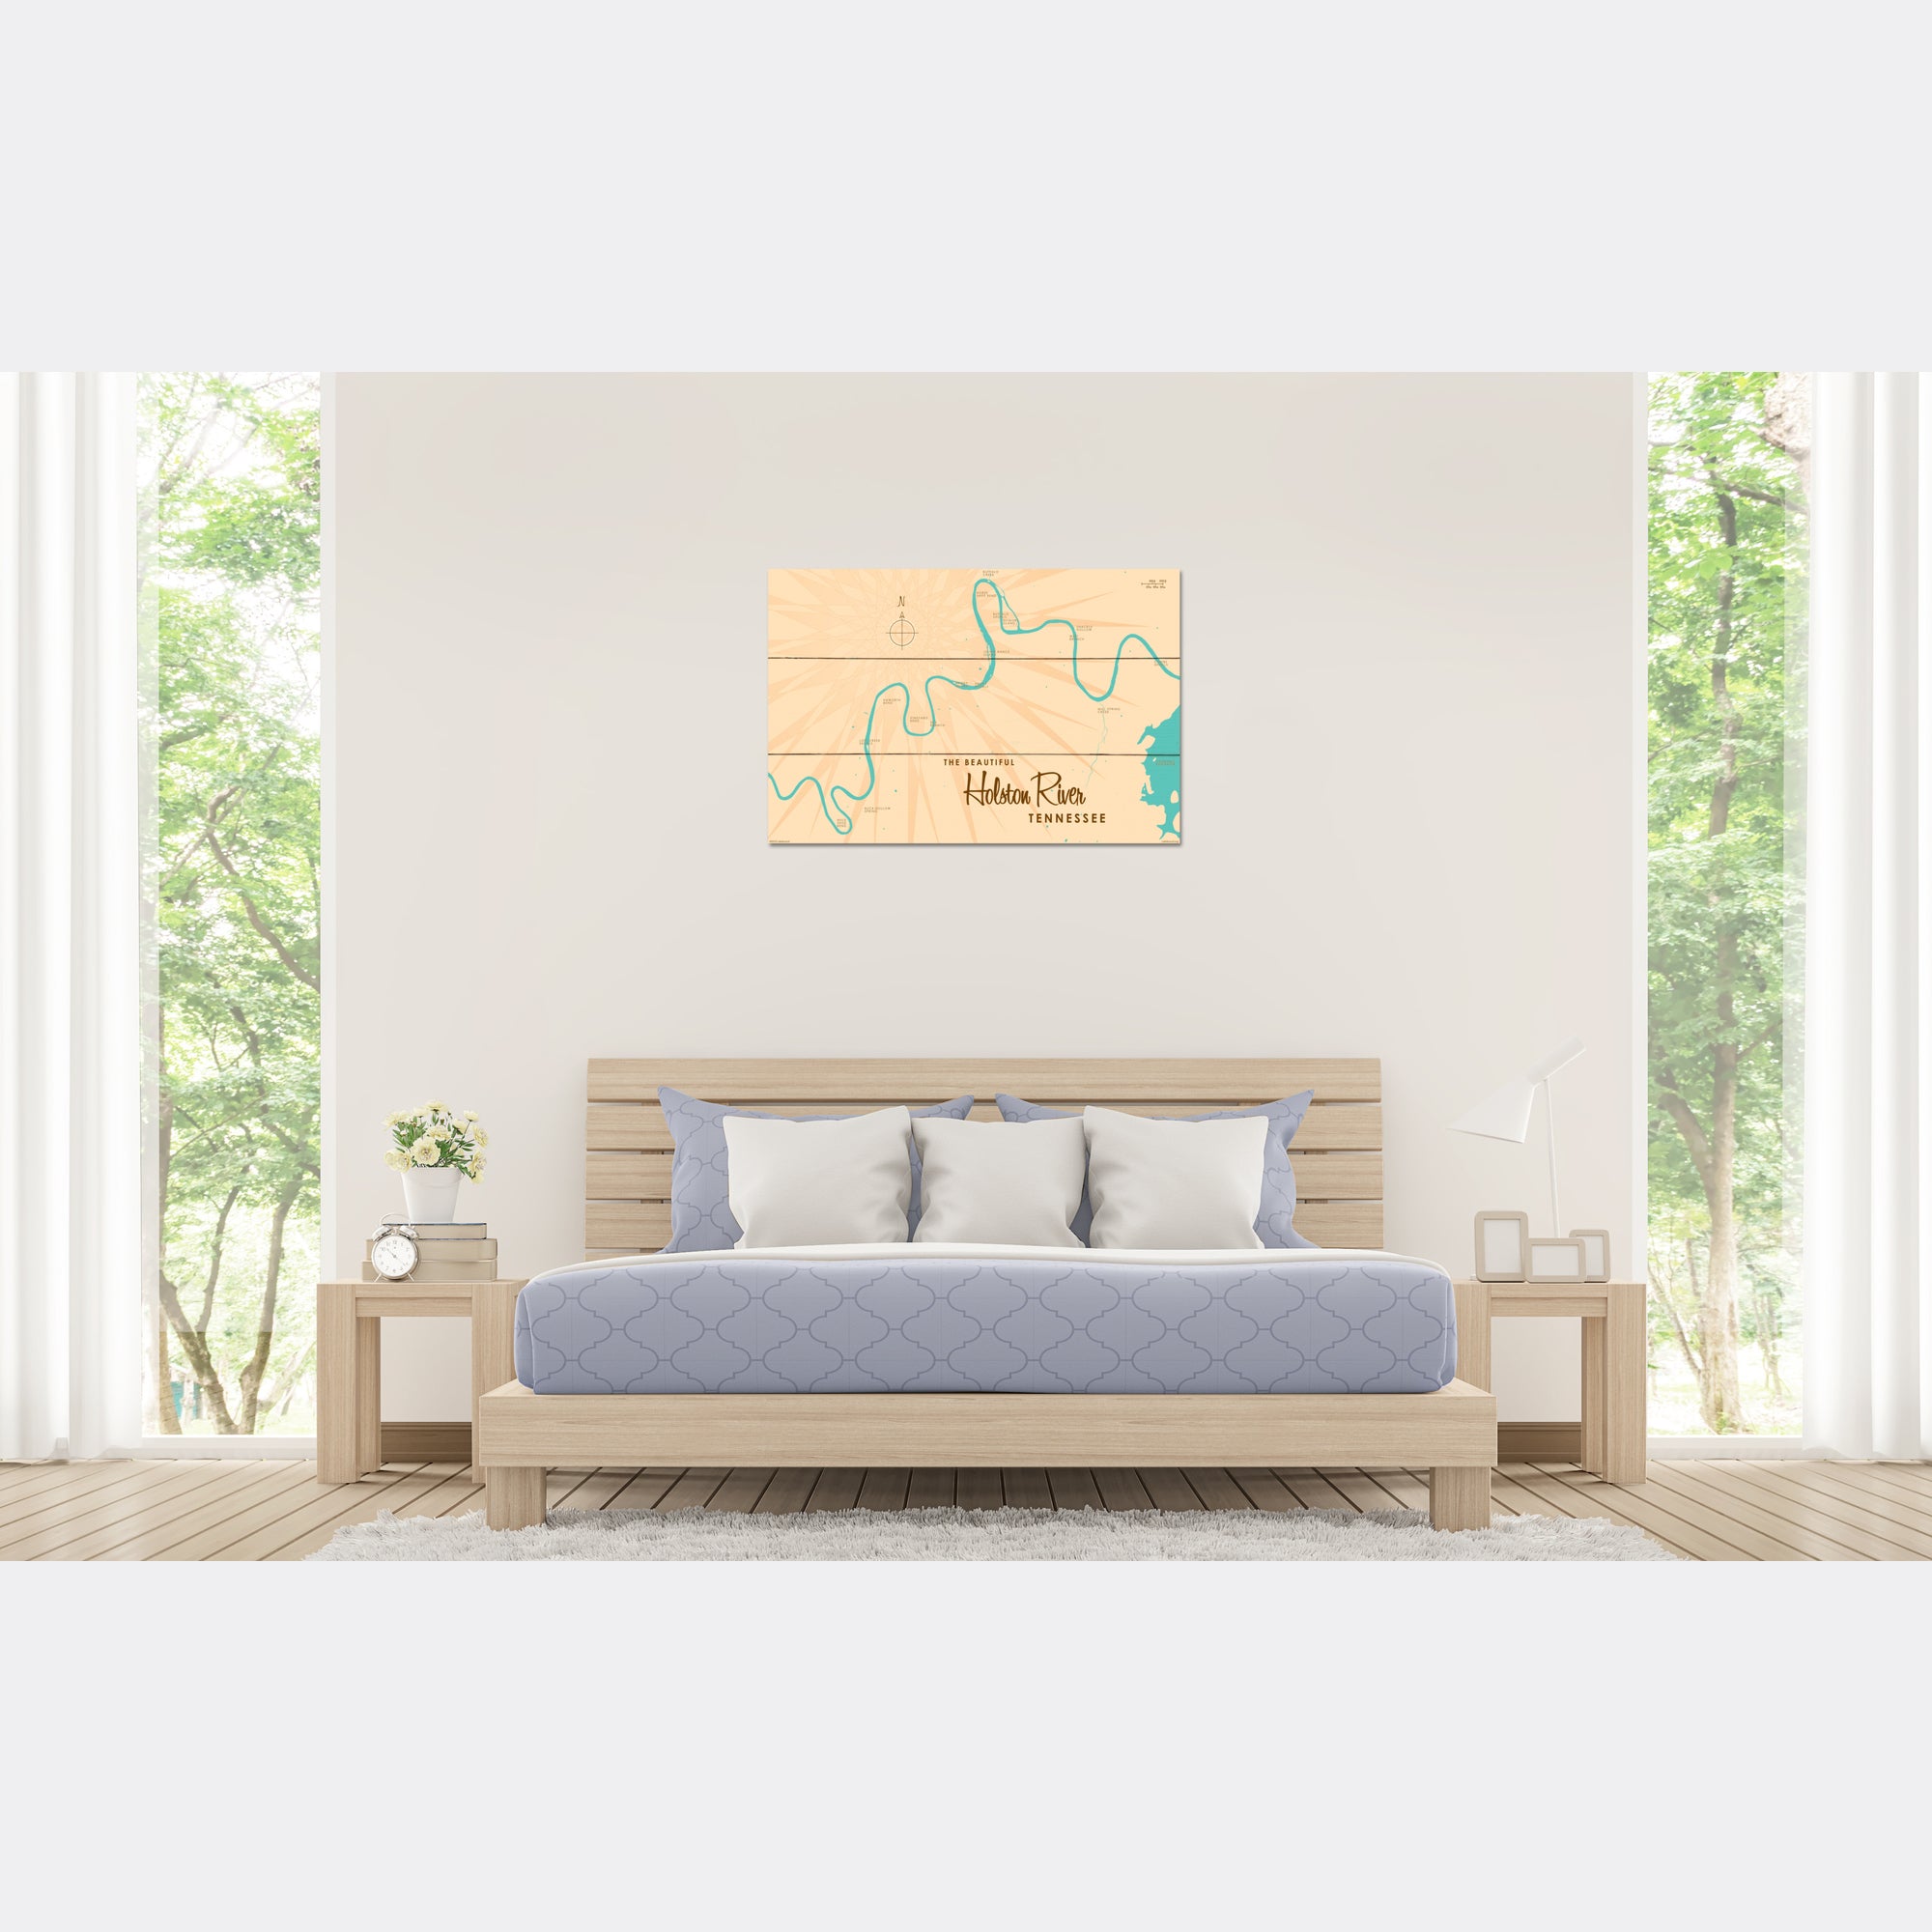 Holston River Tennessee, Wood Sign Map Art